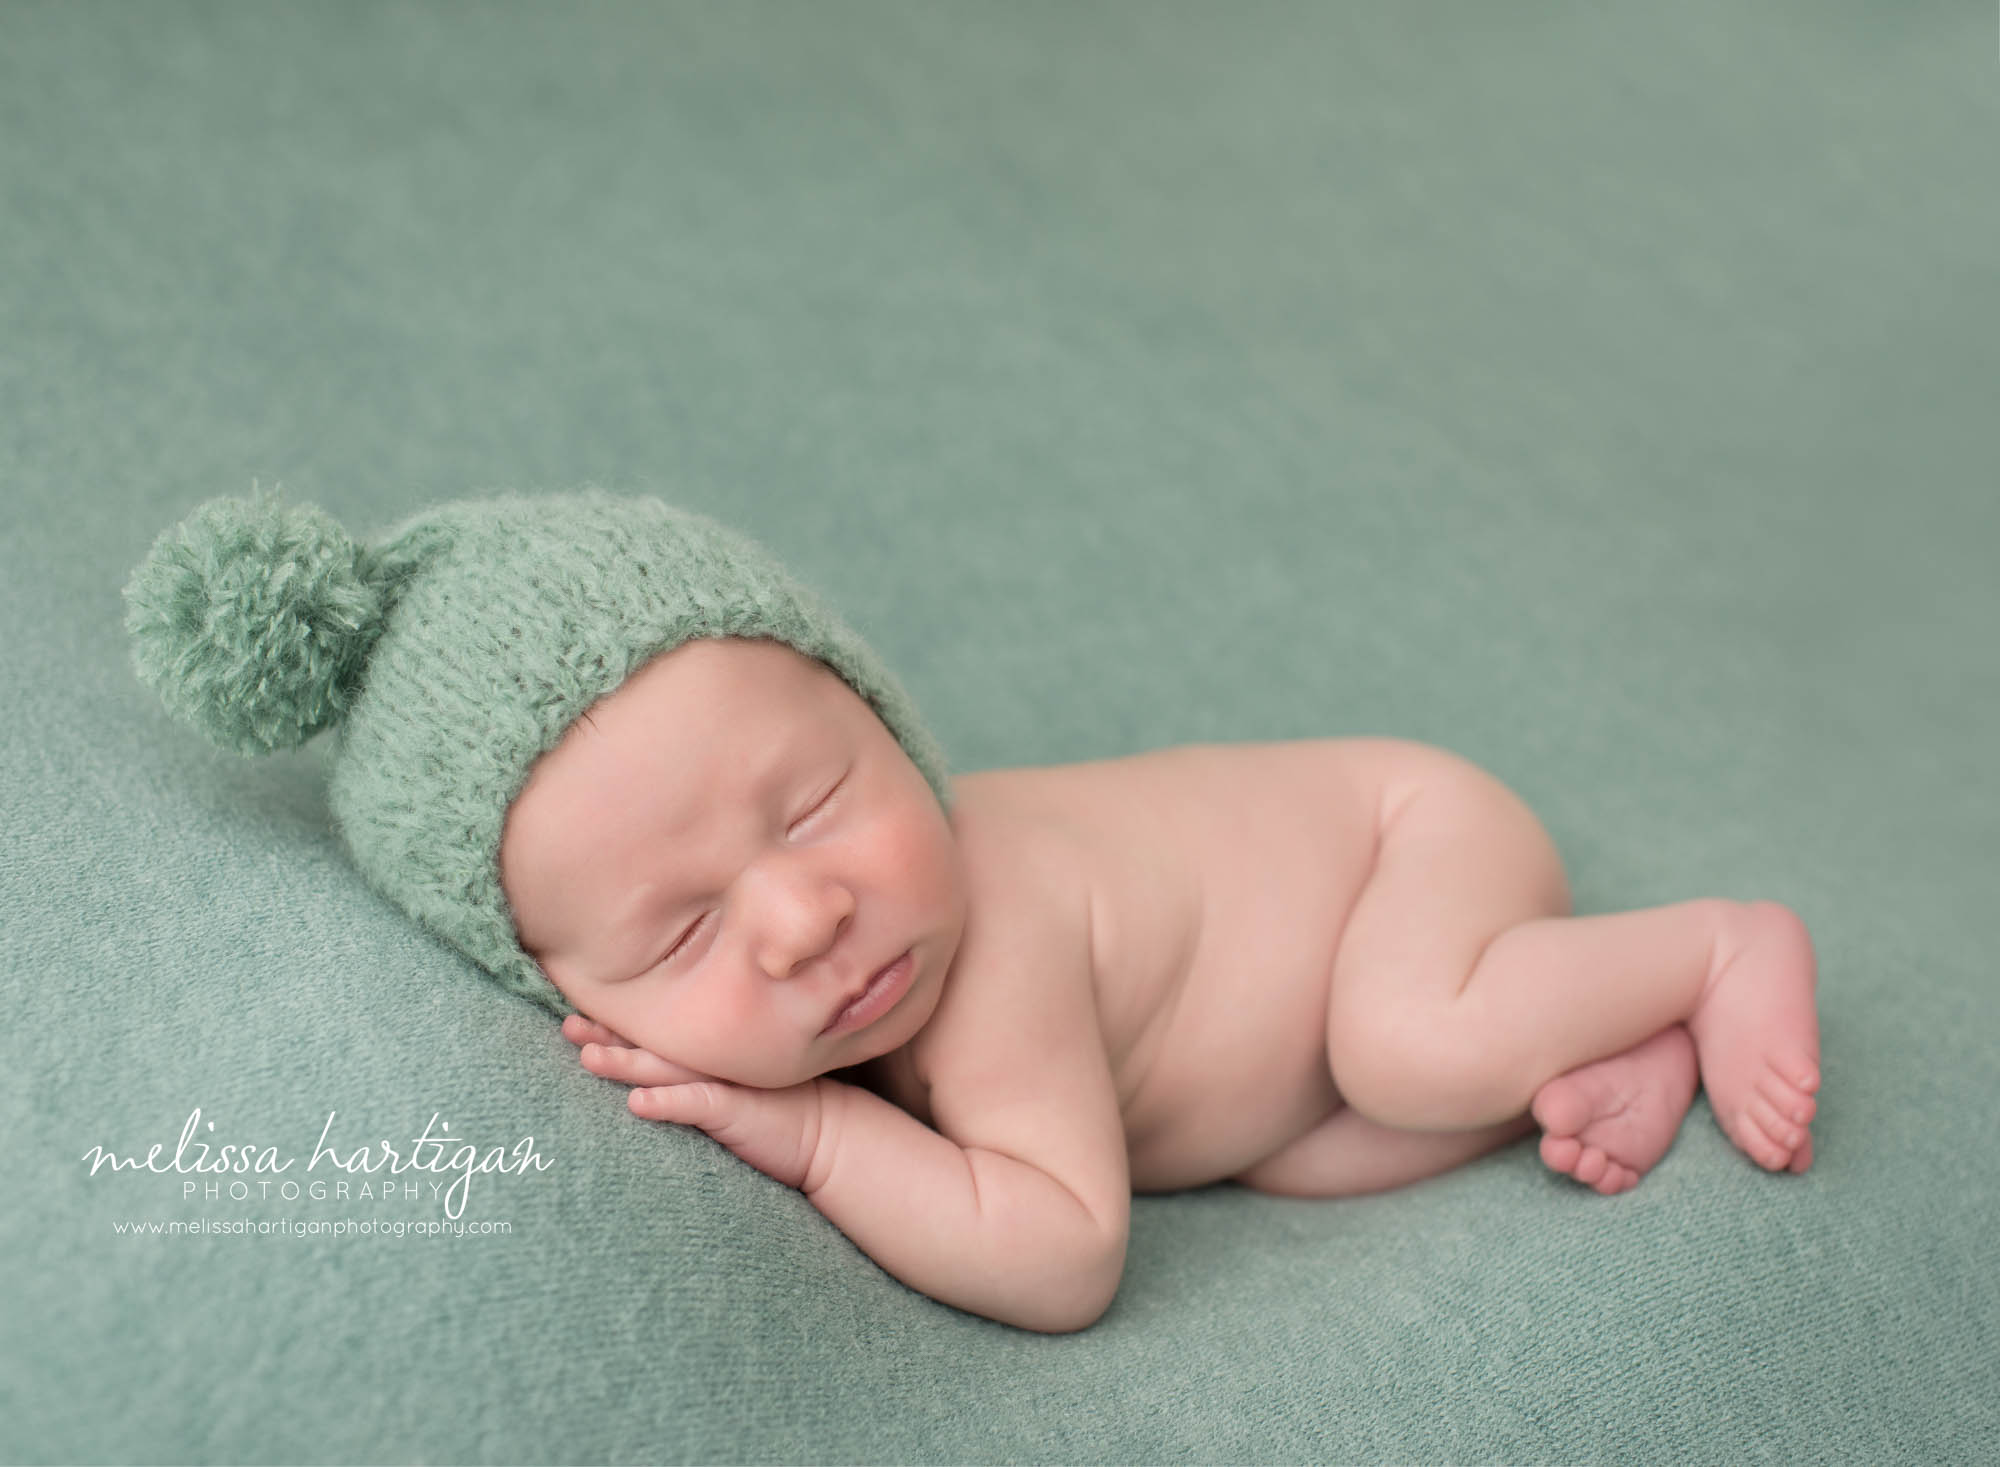 newborn baby boy posed on side with teal green sleepy cap with with pom